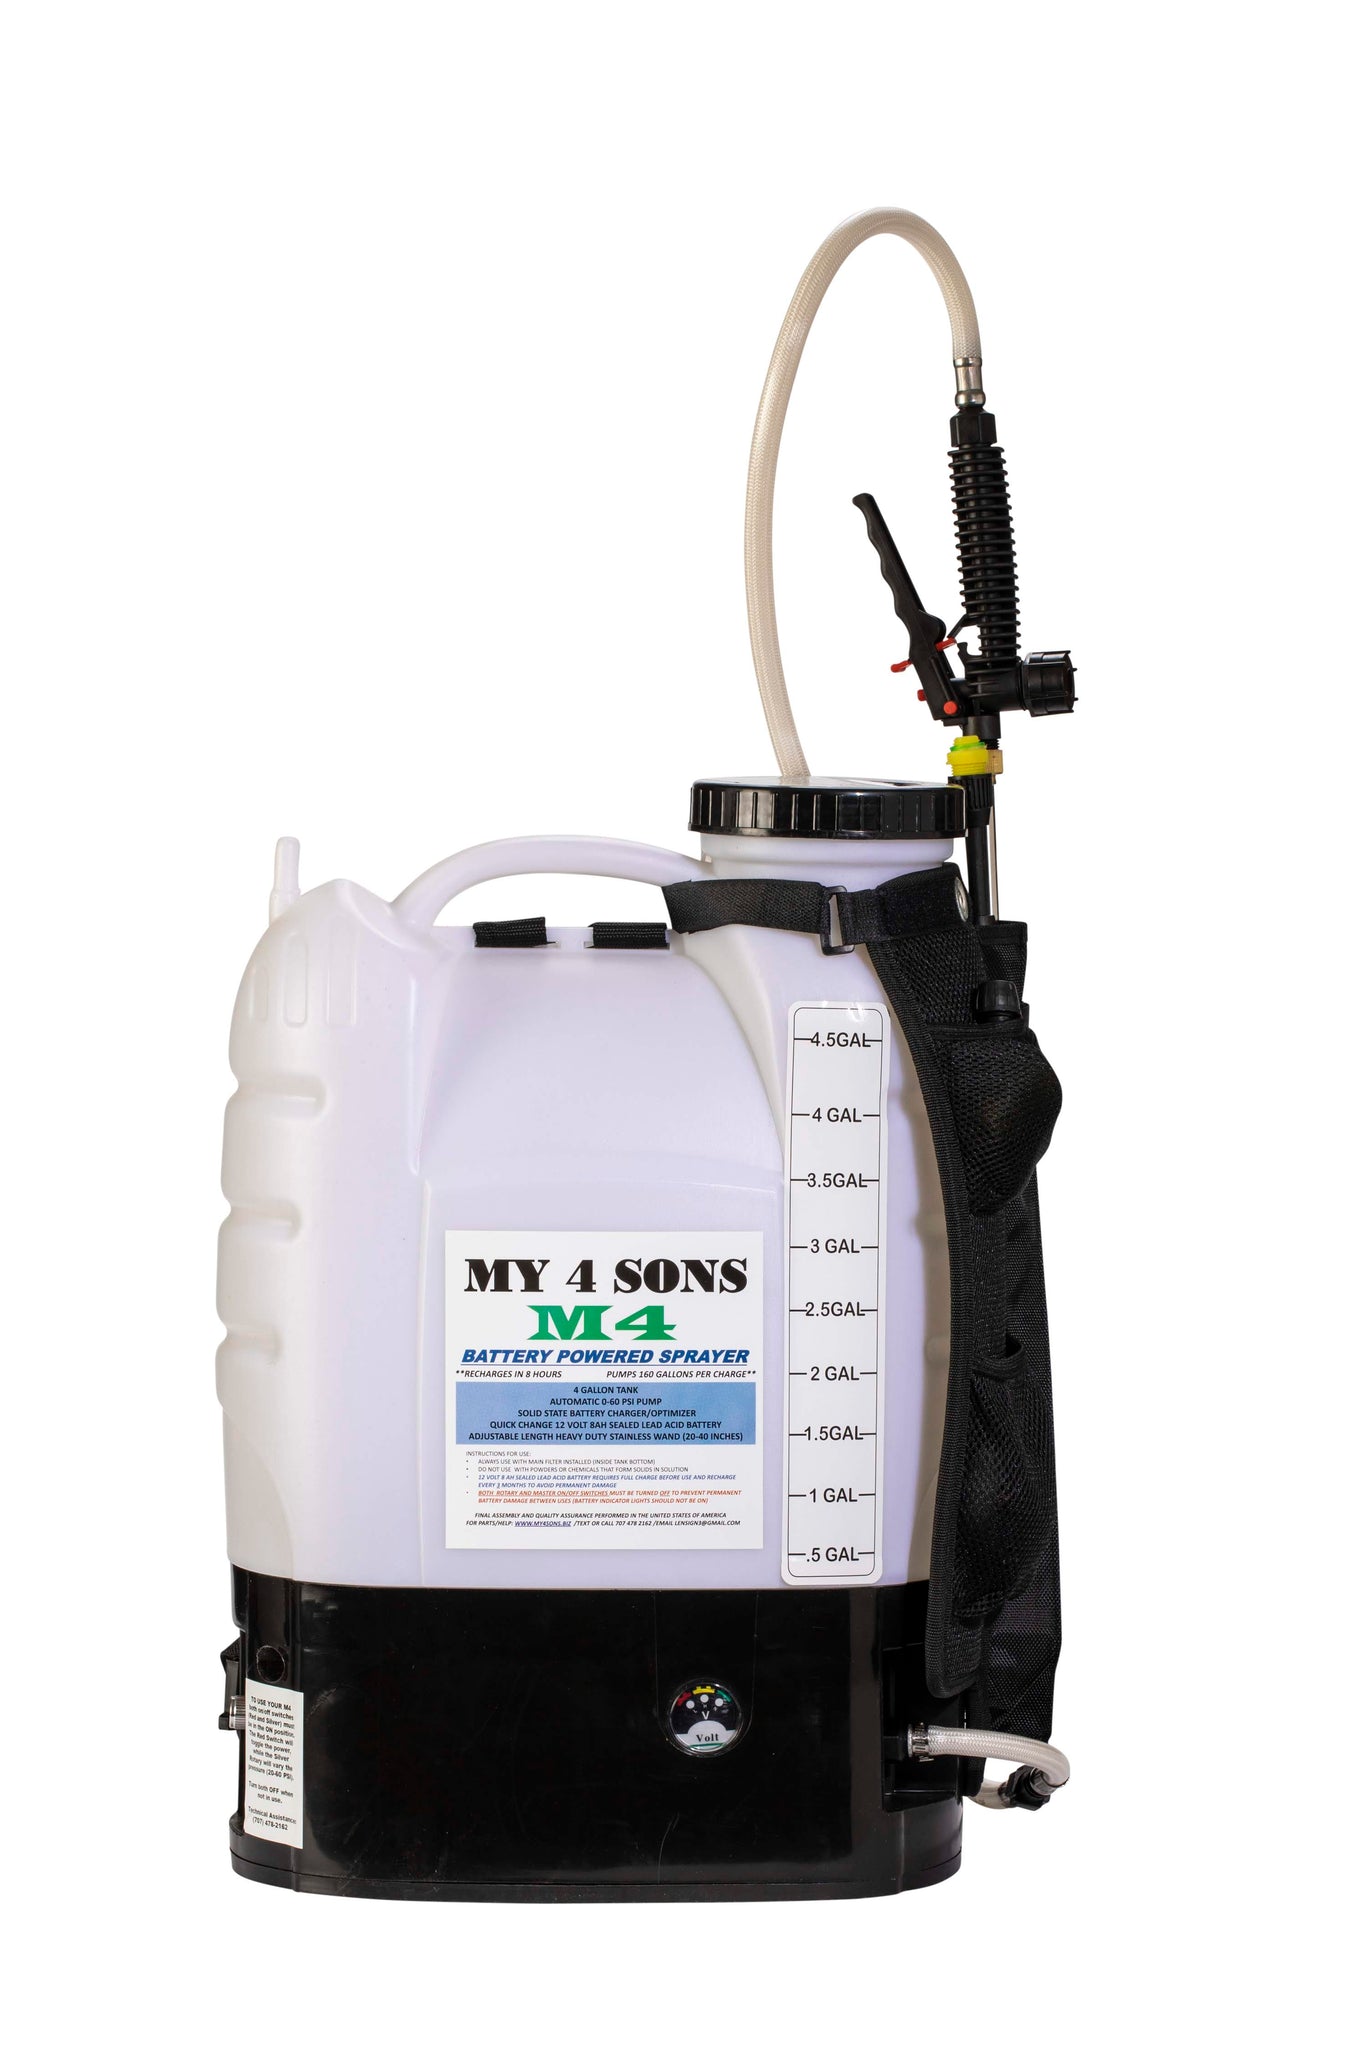 MY 4 SONS M4 Automatic Battery-Powered Backpack Sprayer